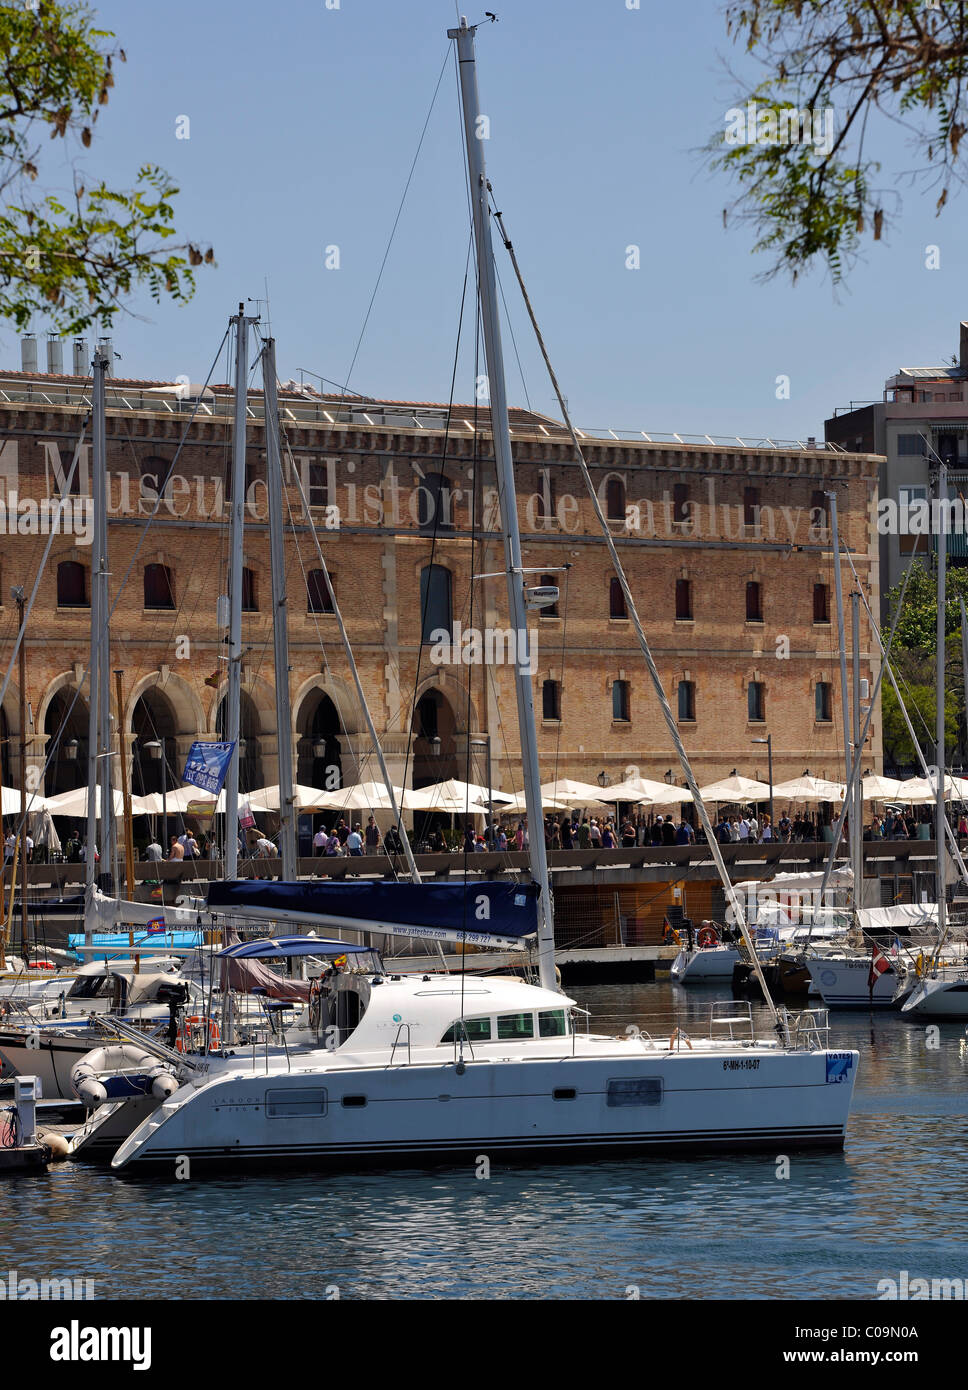 Yachts in Port Vell, in front of the Museum Muse Historia de Catalunya for Catalan history, Barcelona, Catalonia, Spain, Europe Stock Photo